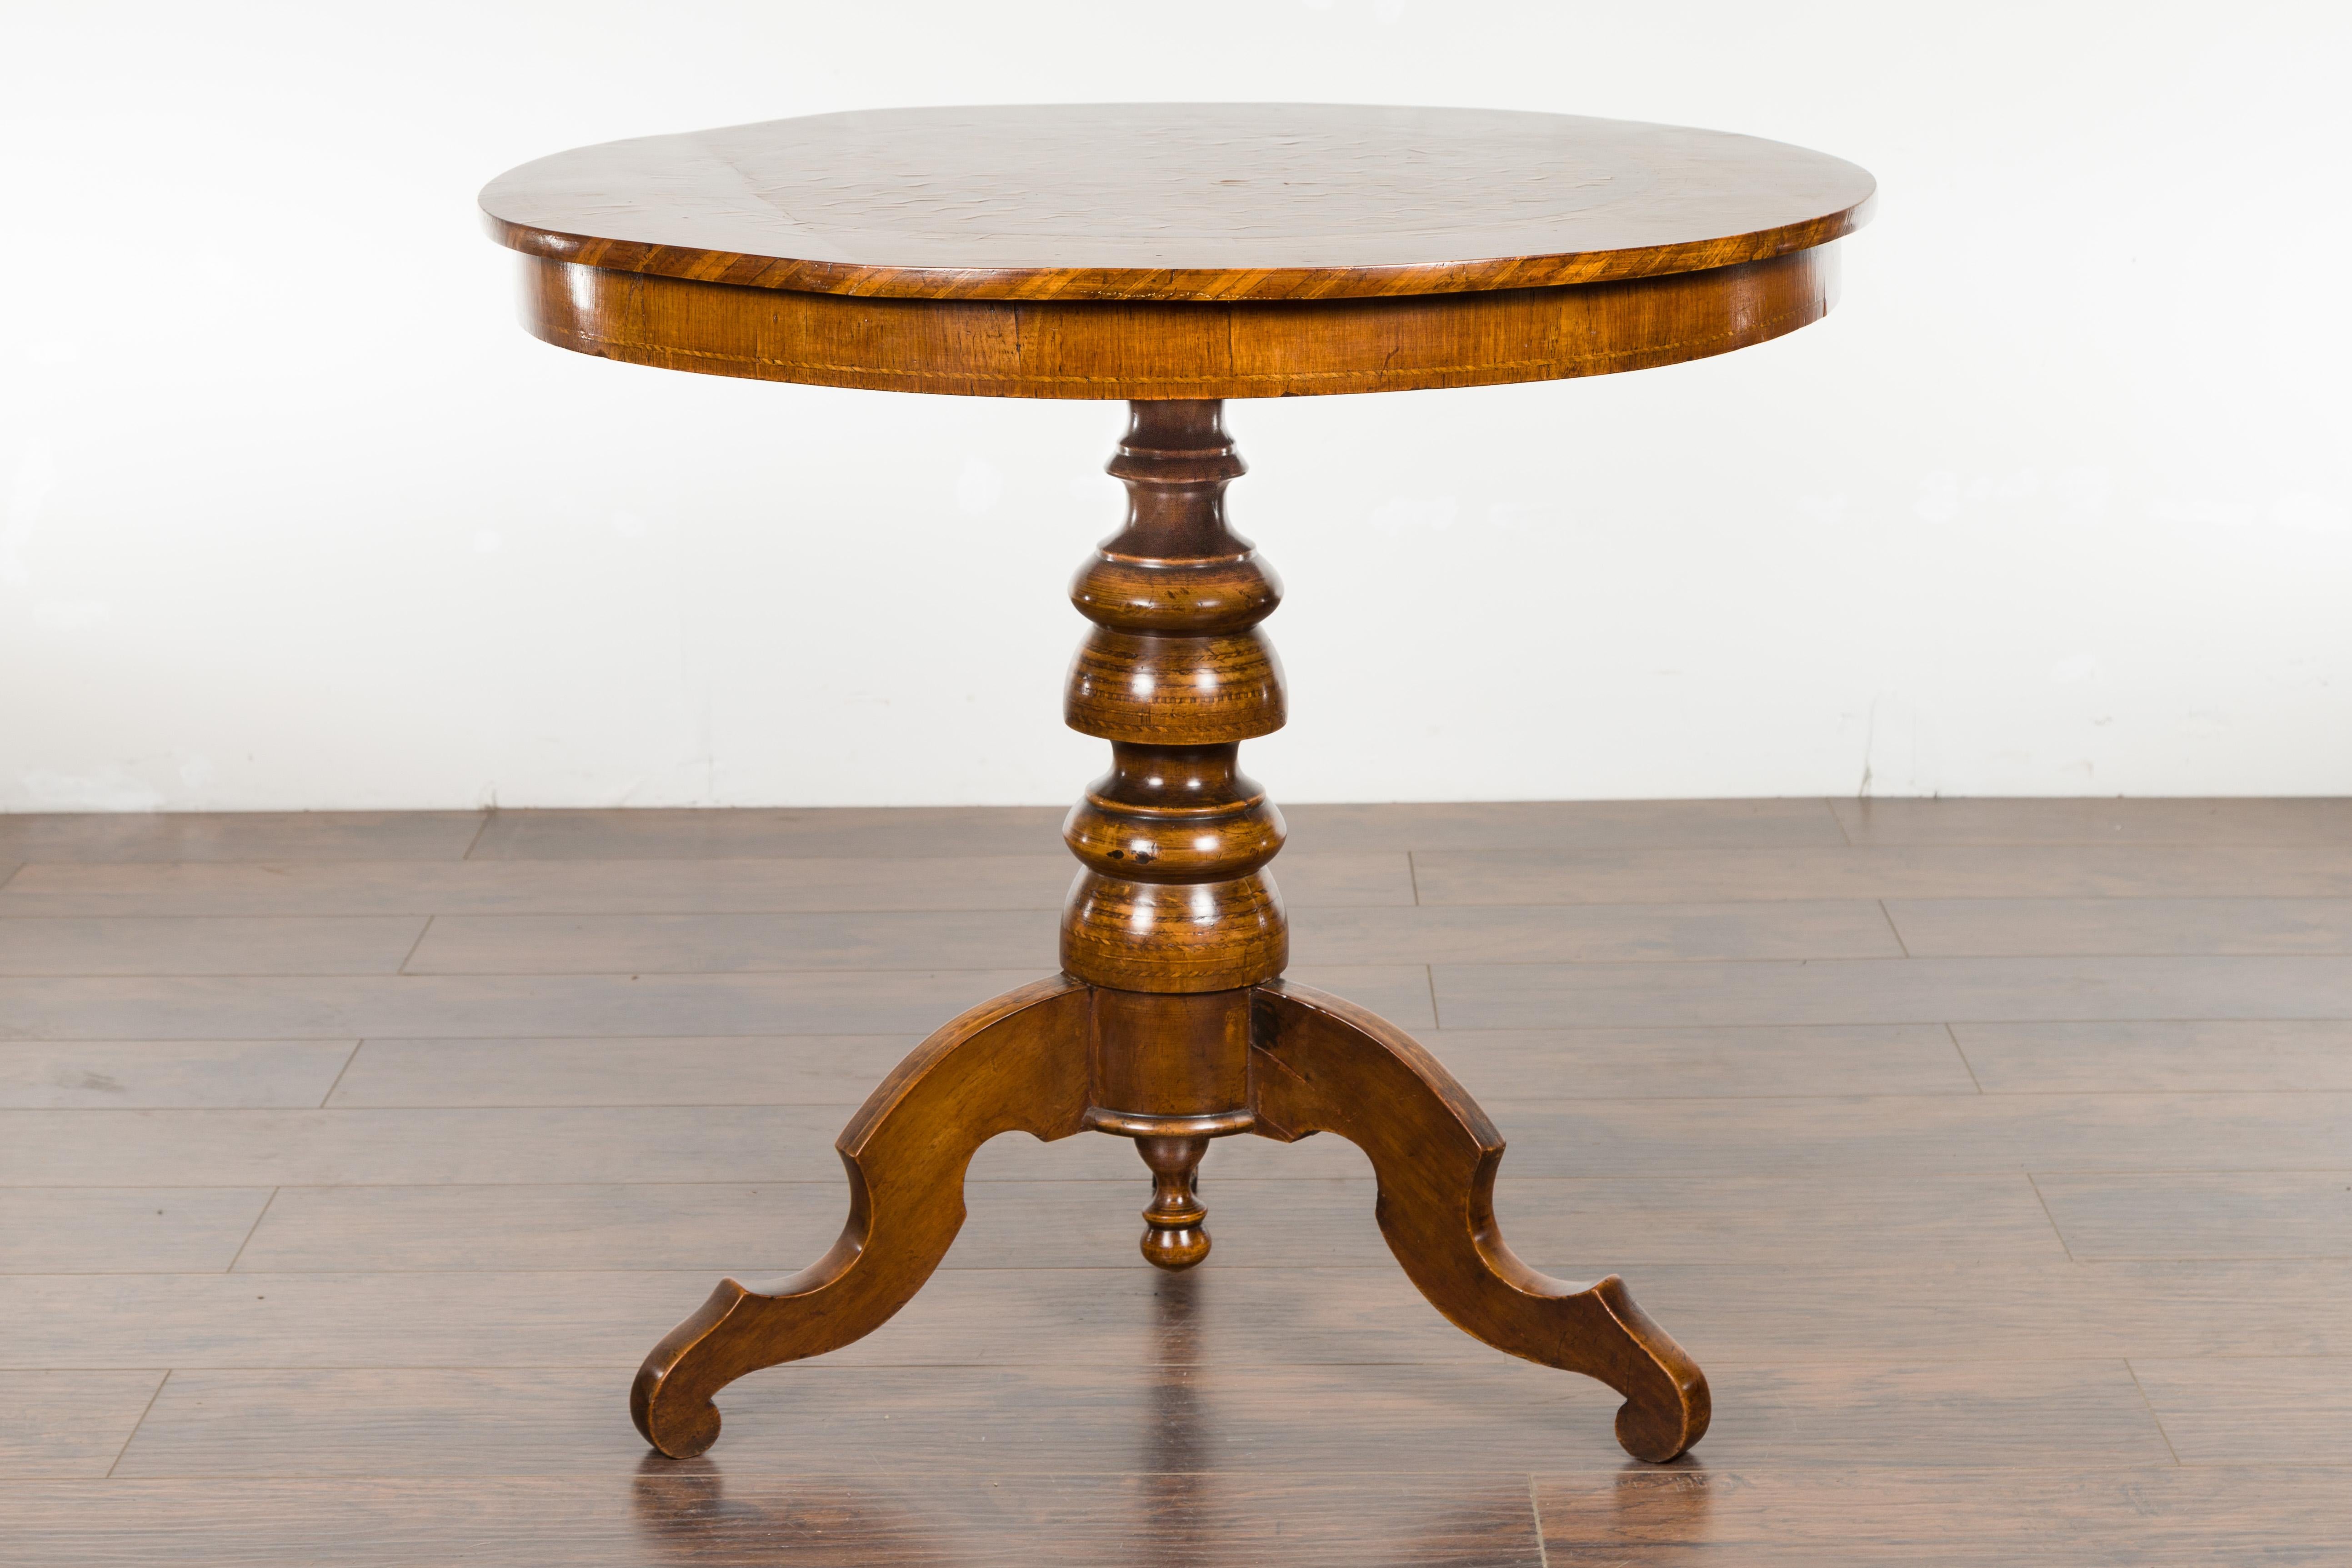 An Italian walnut Sorrento pedestal table from the late 19th century, with marquetry top and tripod base. Created in Southwestern Italy during the last quarter of the 19th century, this walnut table features a circular top adorned with exquisite